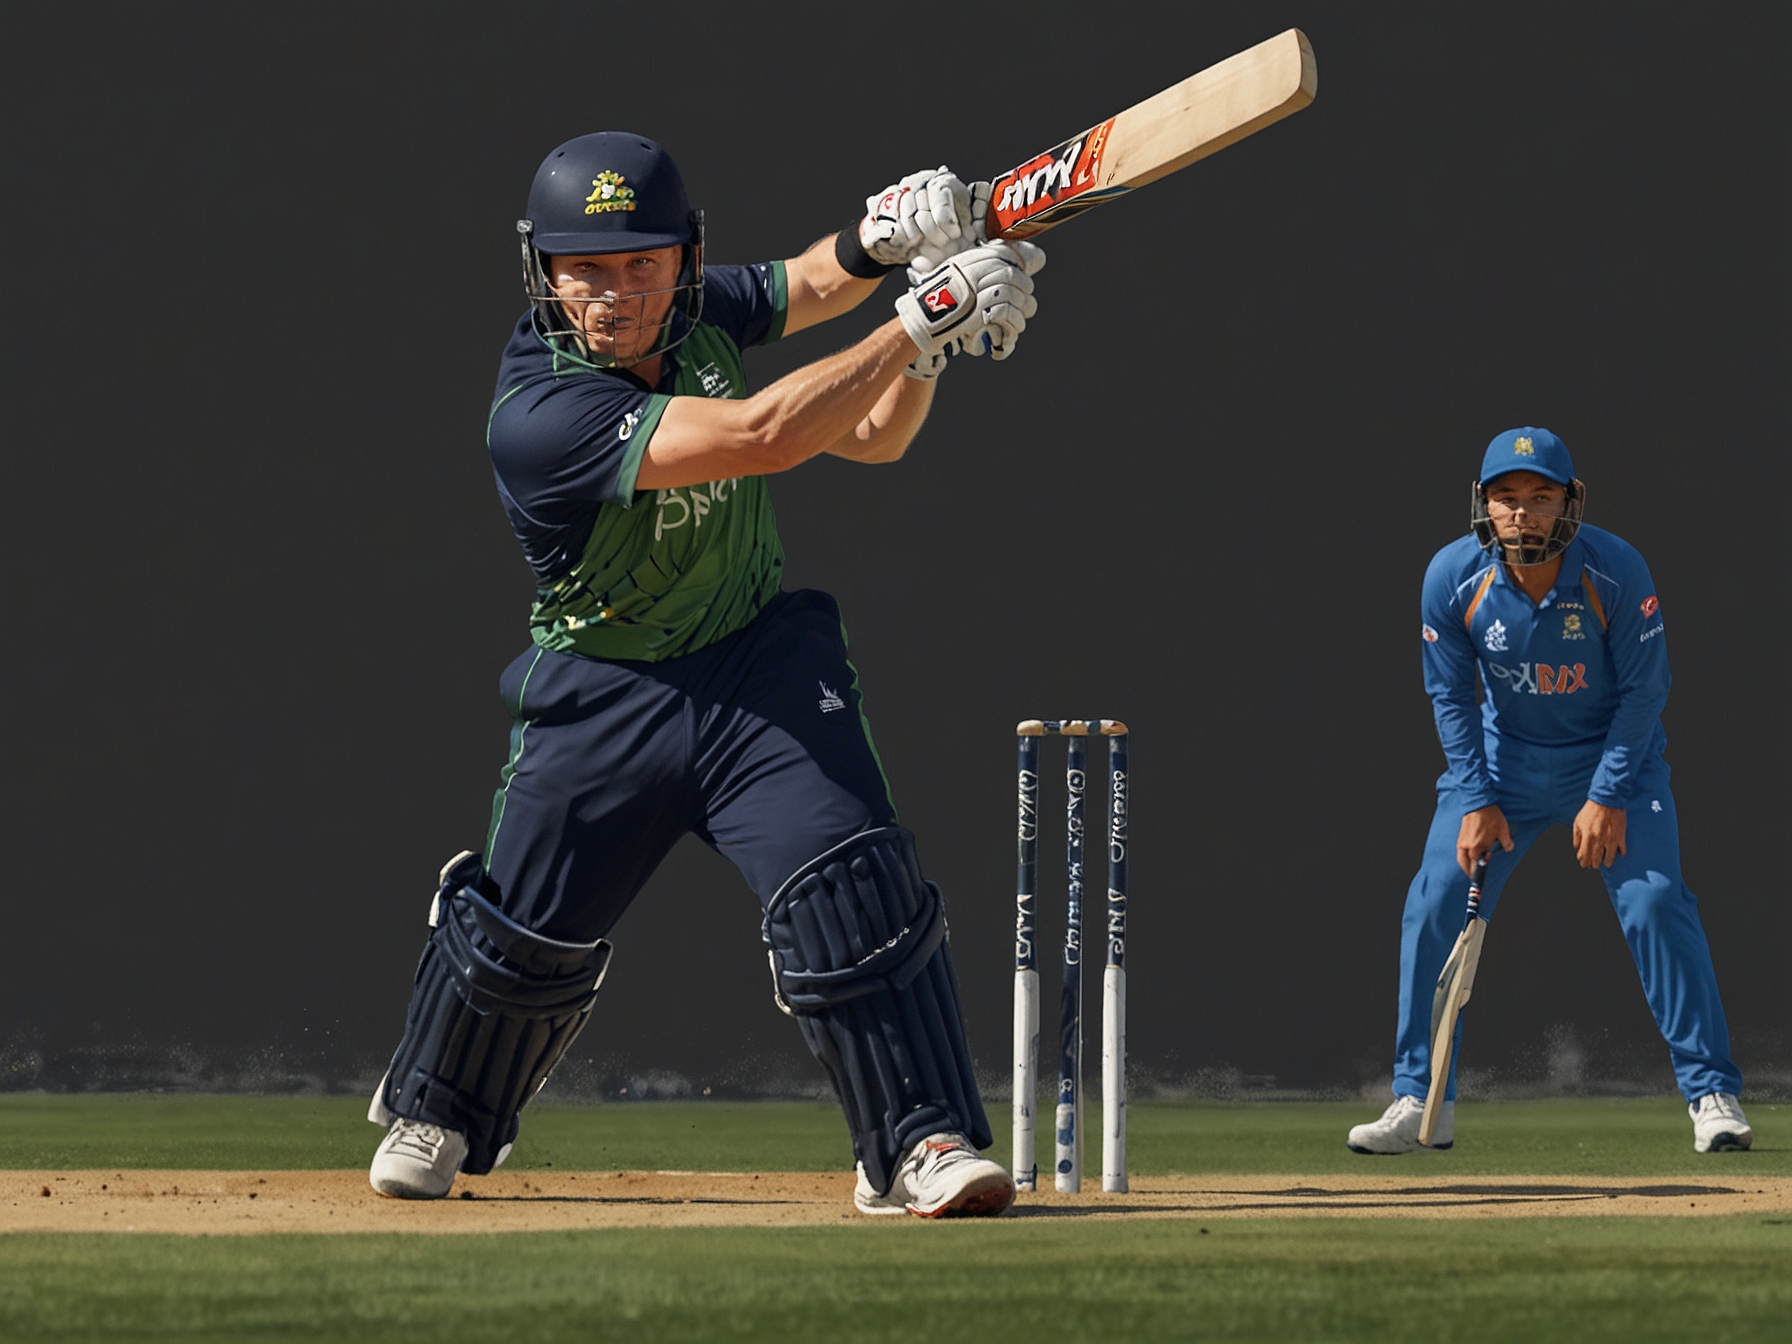 David Miller in action on the field, playing a powerful shot during a T20 international match, representing his dynamic batting style that has thrilled cricket fans worldwide.